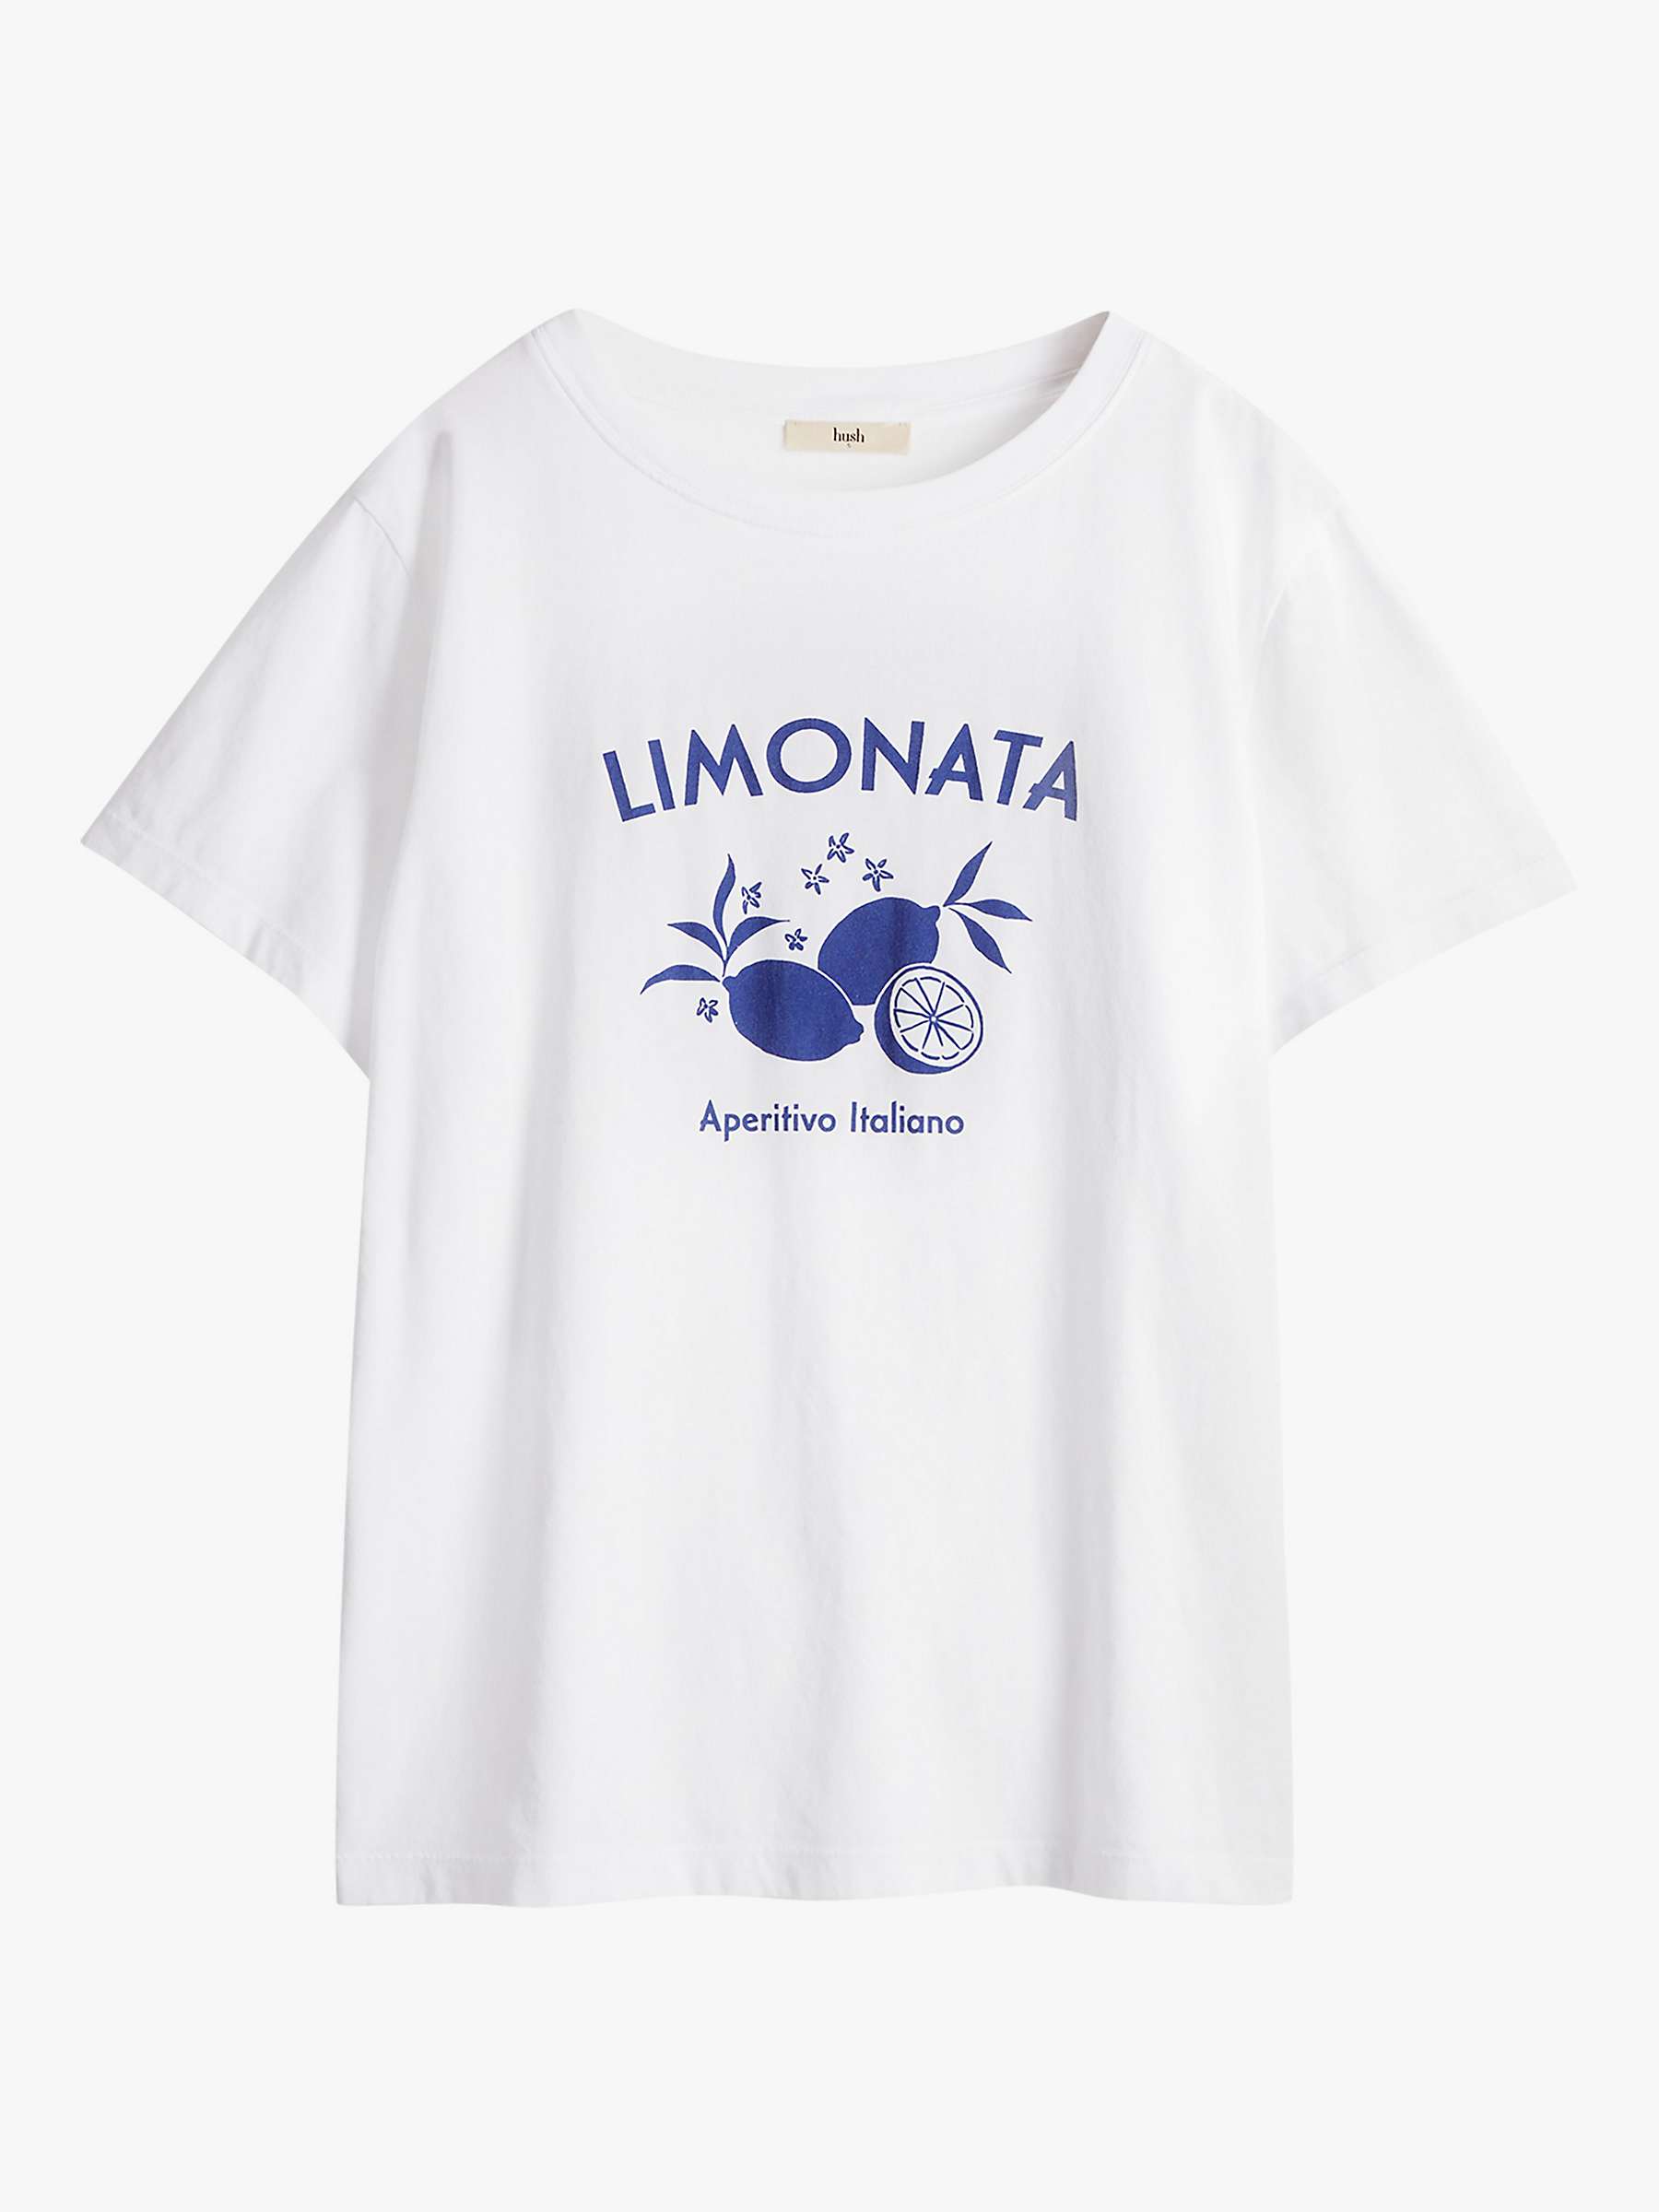 Buy HUSH Limonata Relaxed Fit T-Shirt, White Online at johnlewis.com